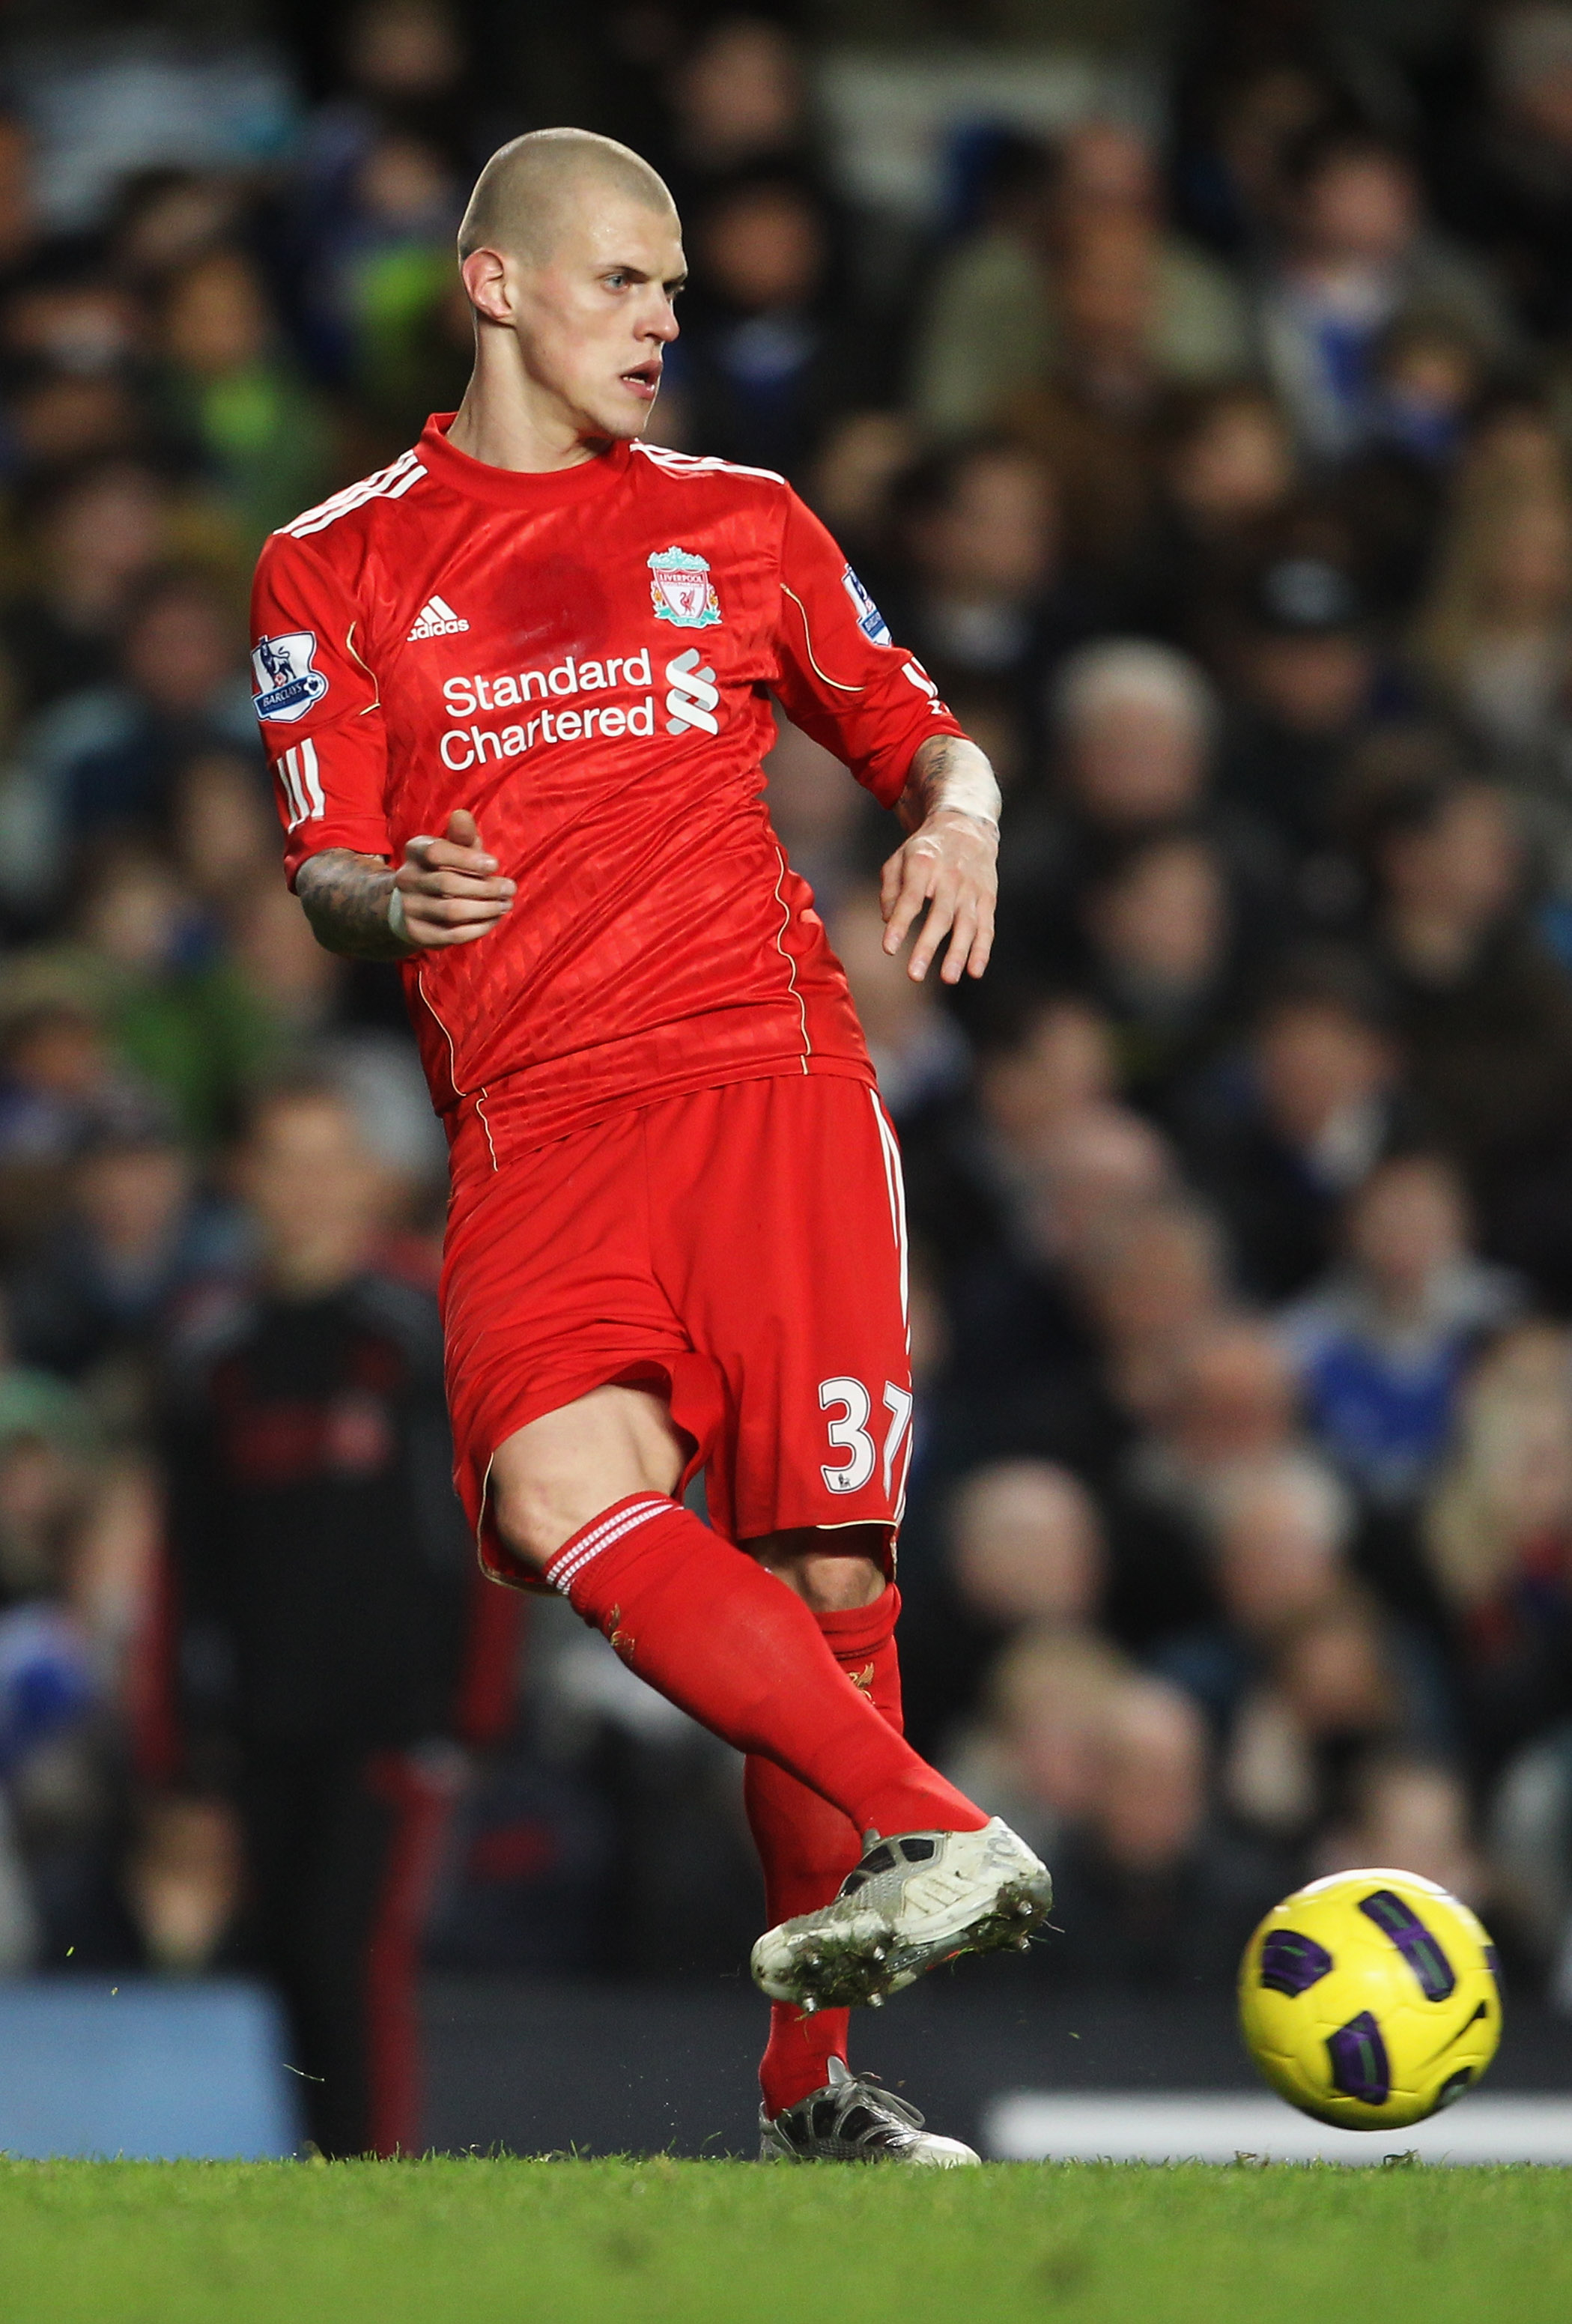 LONDON, ENGLAND - FEBRUARY 06:  Martin Skrtel of Liverpool in action during the Barclays Premier League match between Chelsea and Liverpool at Stamford Bridge on February 6, 2011 in London, England.  (Photo by Scott Heavey/Getty Images)